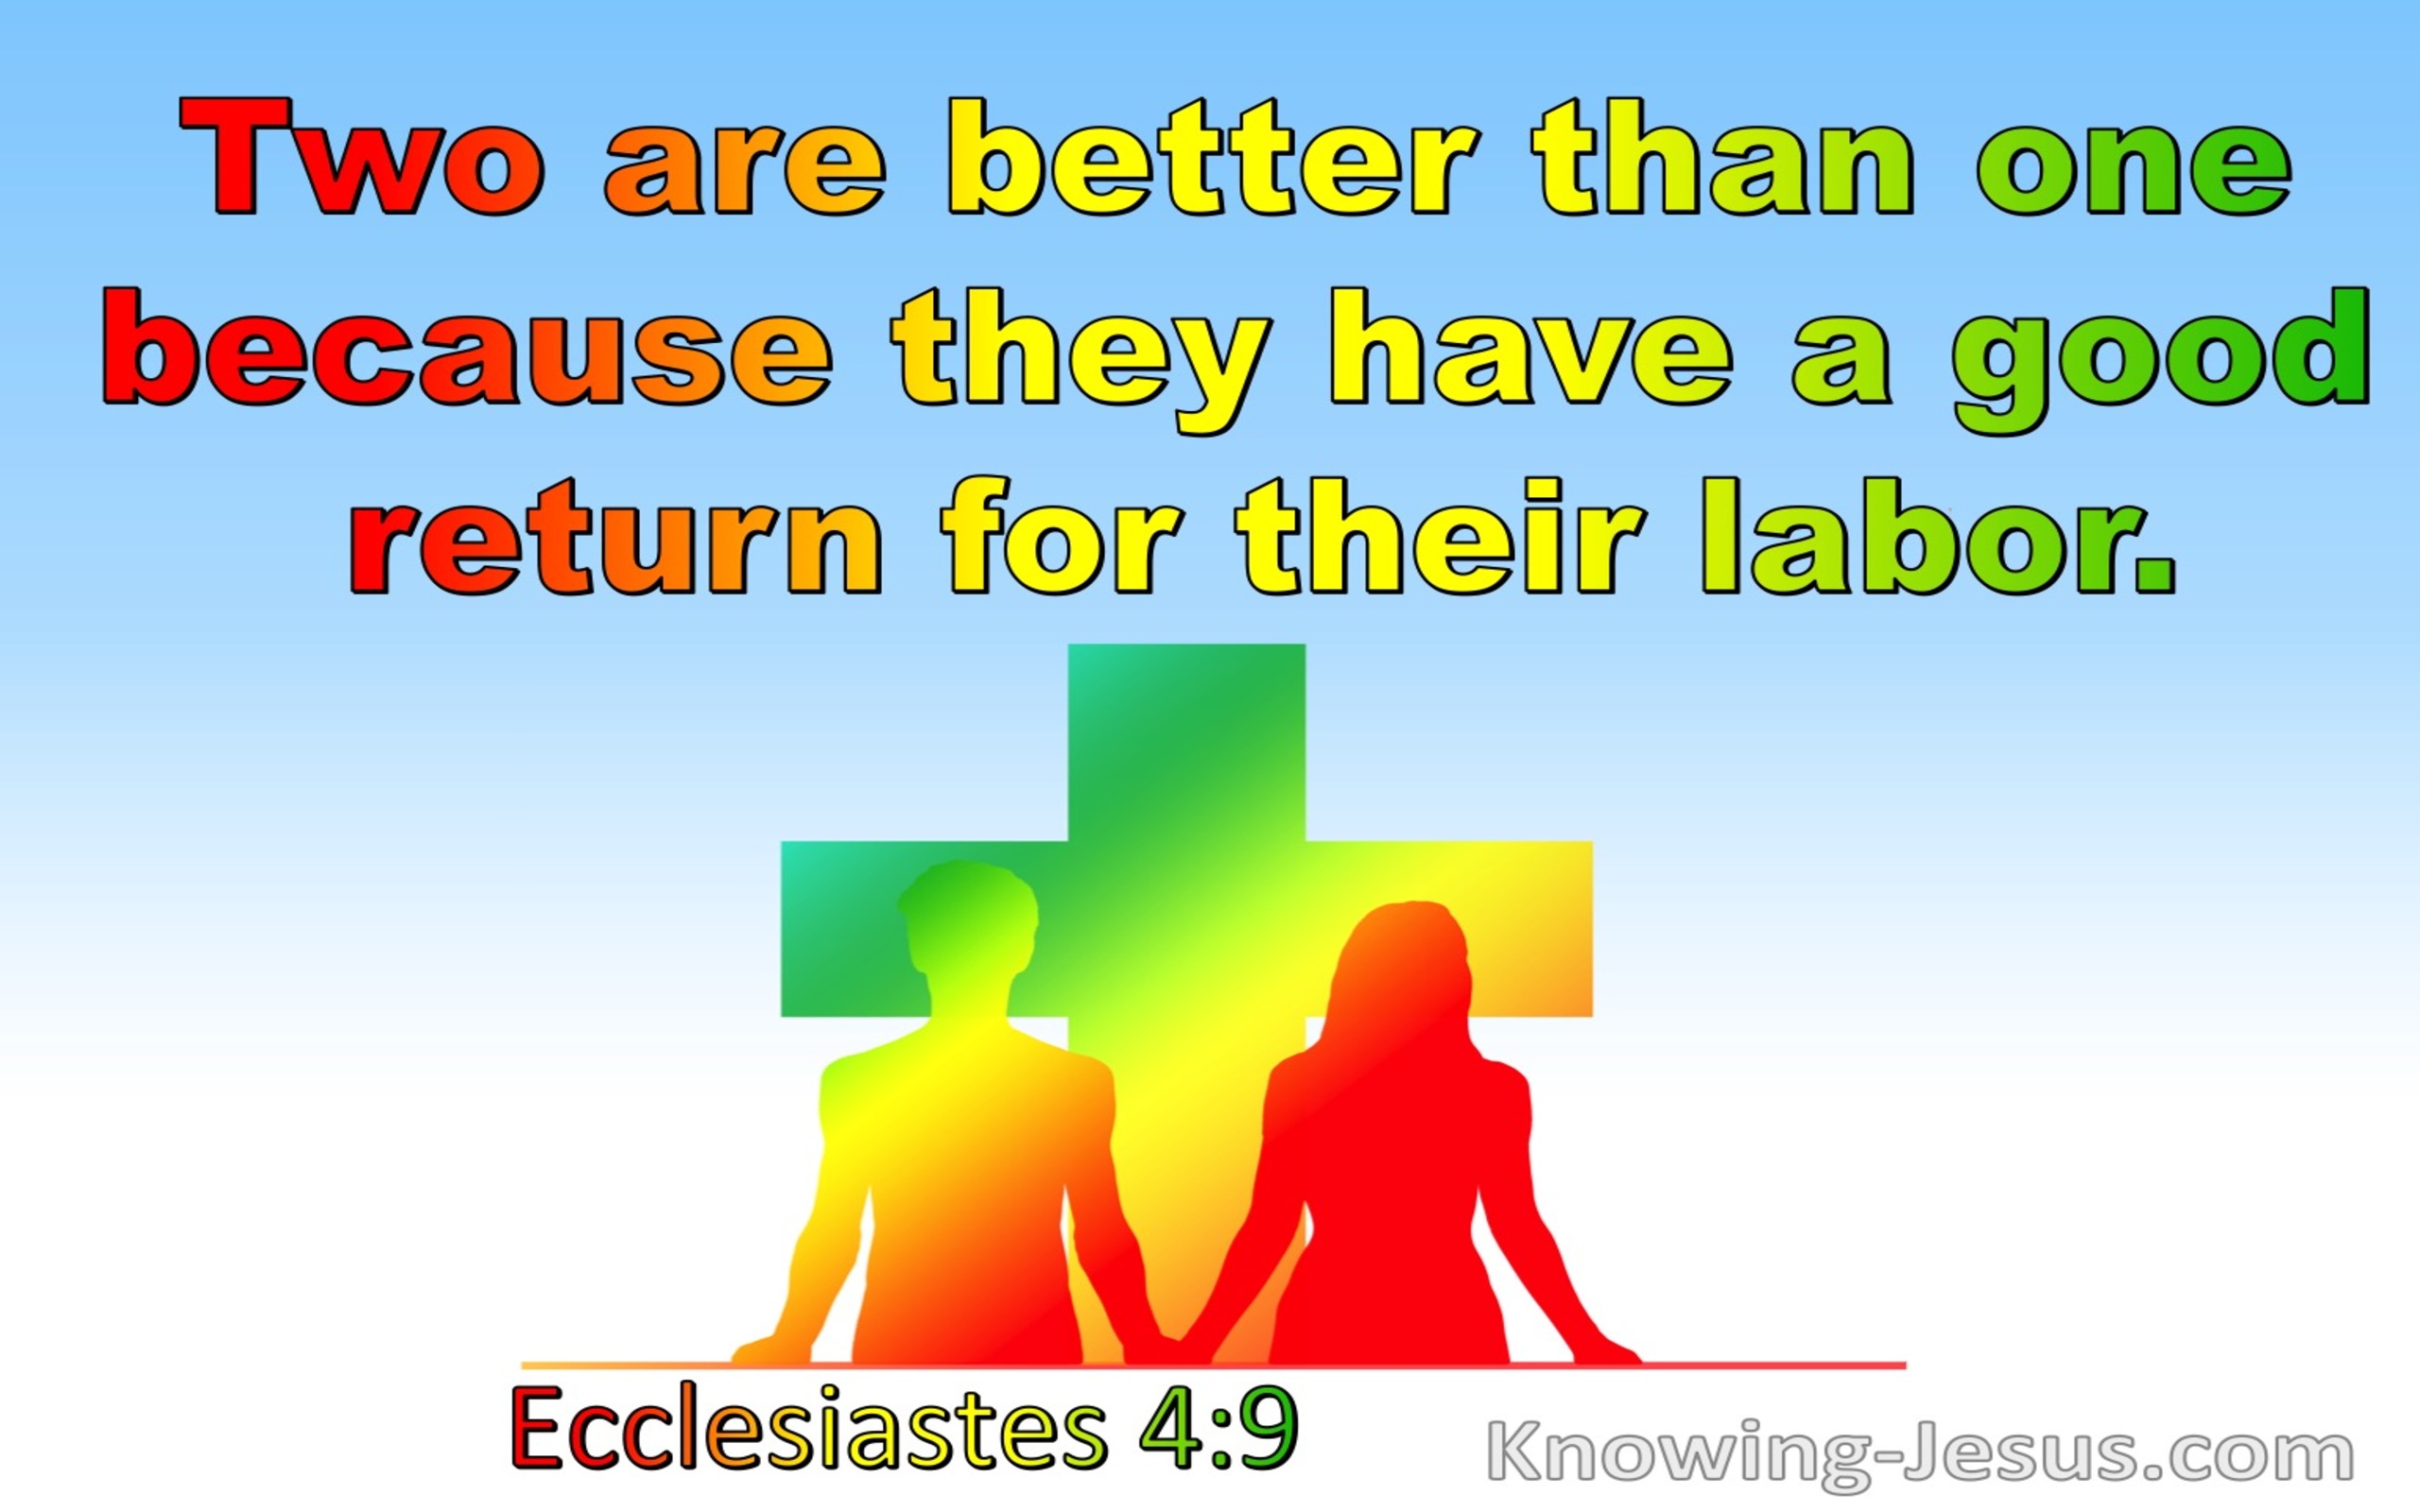 Ecclesiastes 4:9 Two Are Better Than One  (blue)